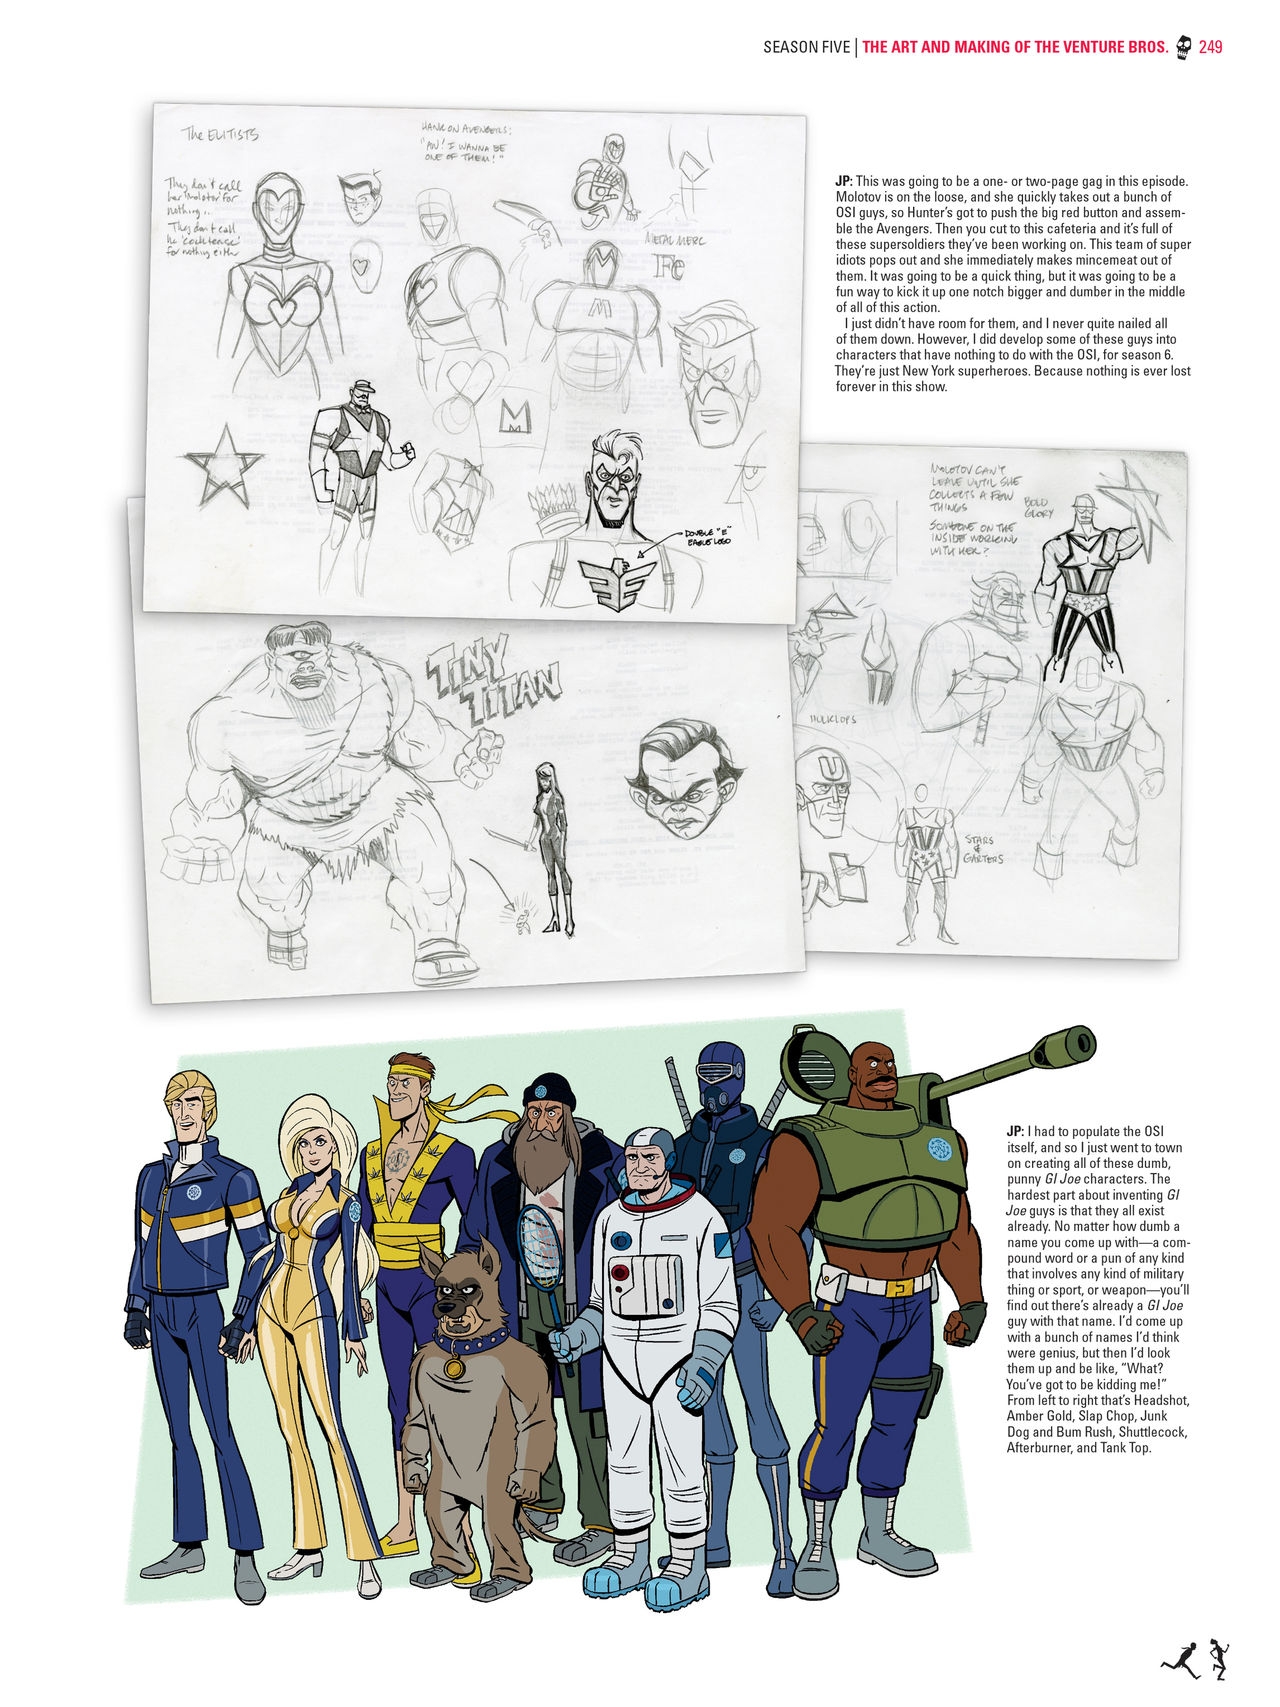 Go Team Venture! - The Art and Making of the Venture Bros 247